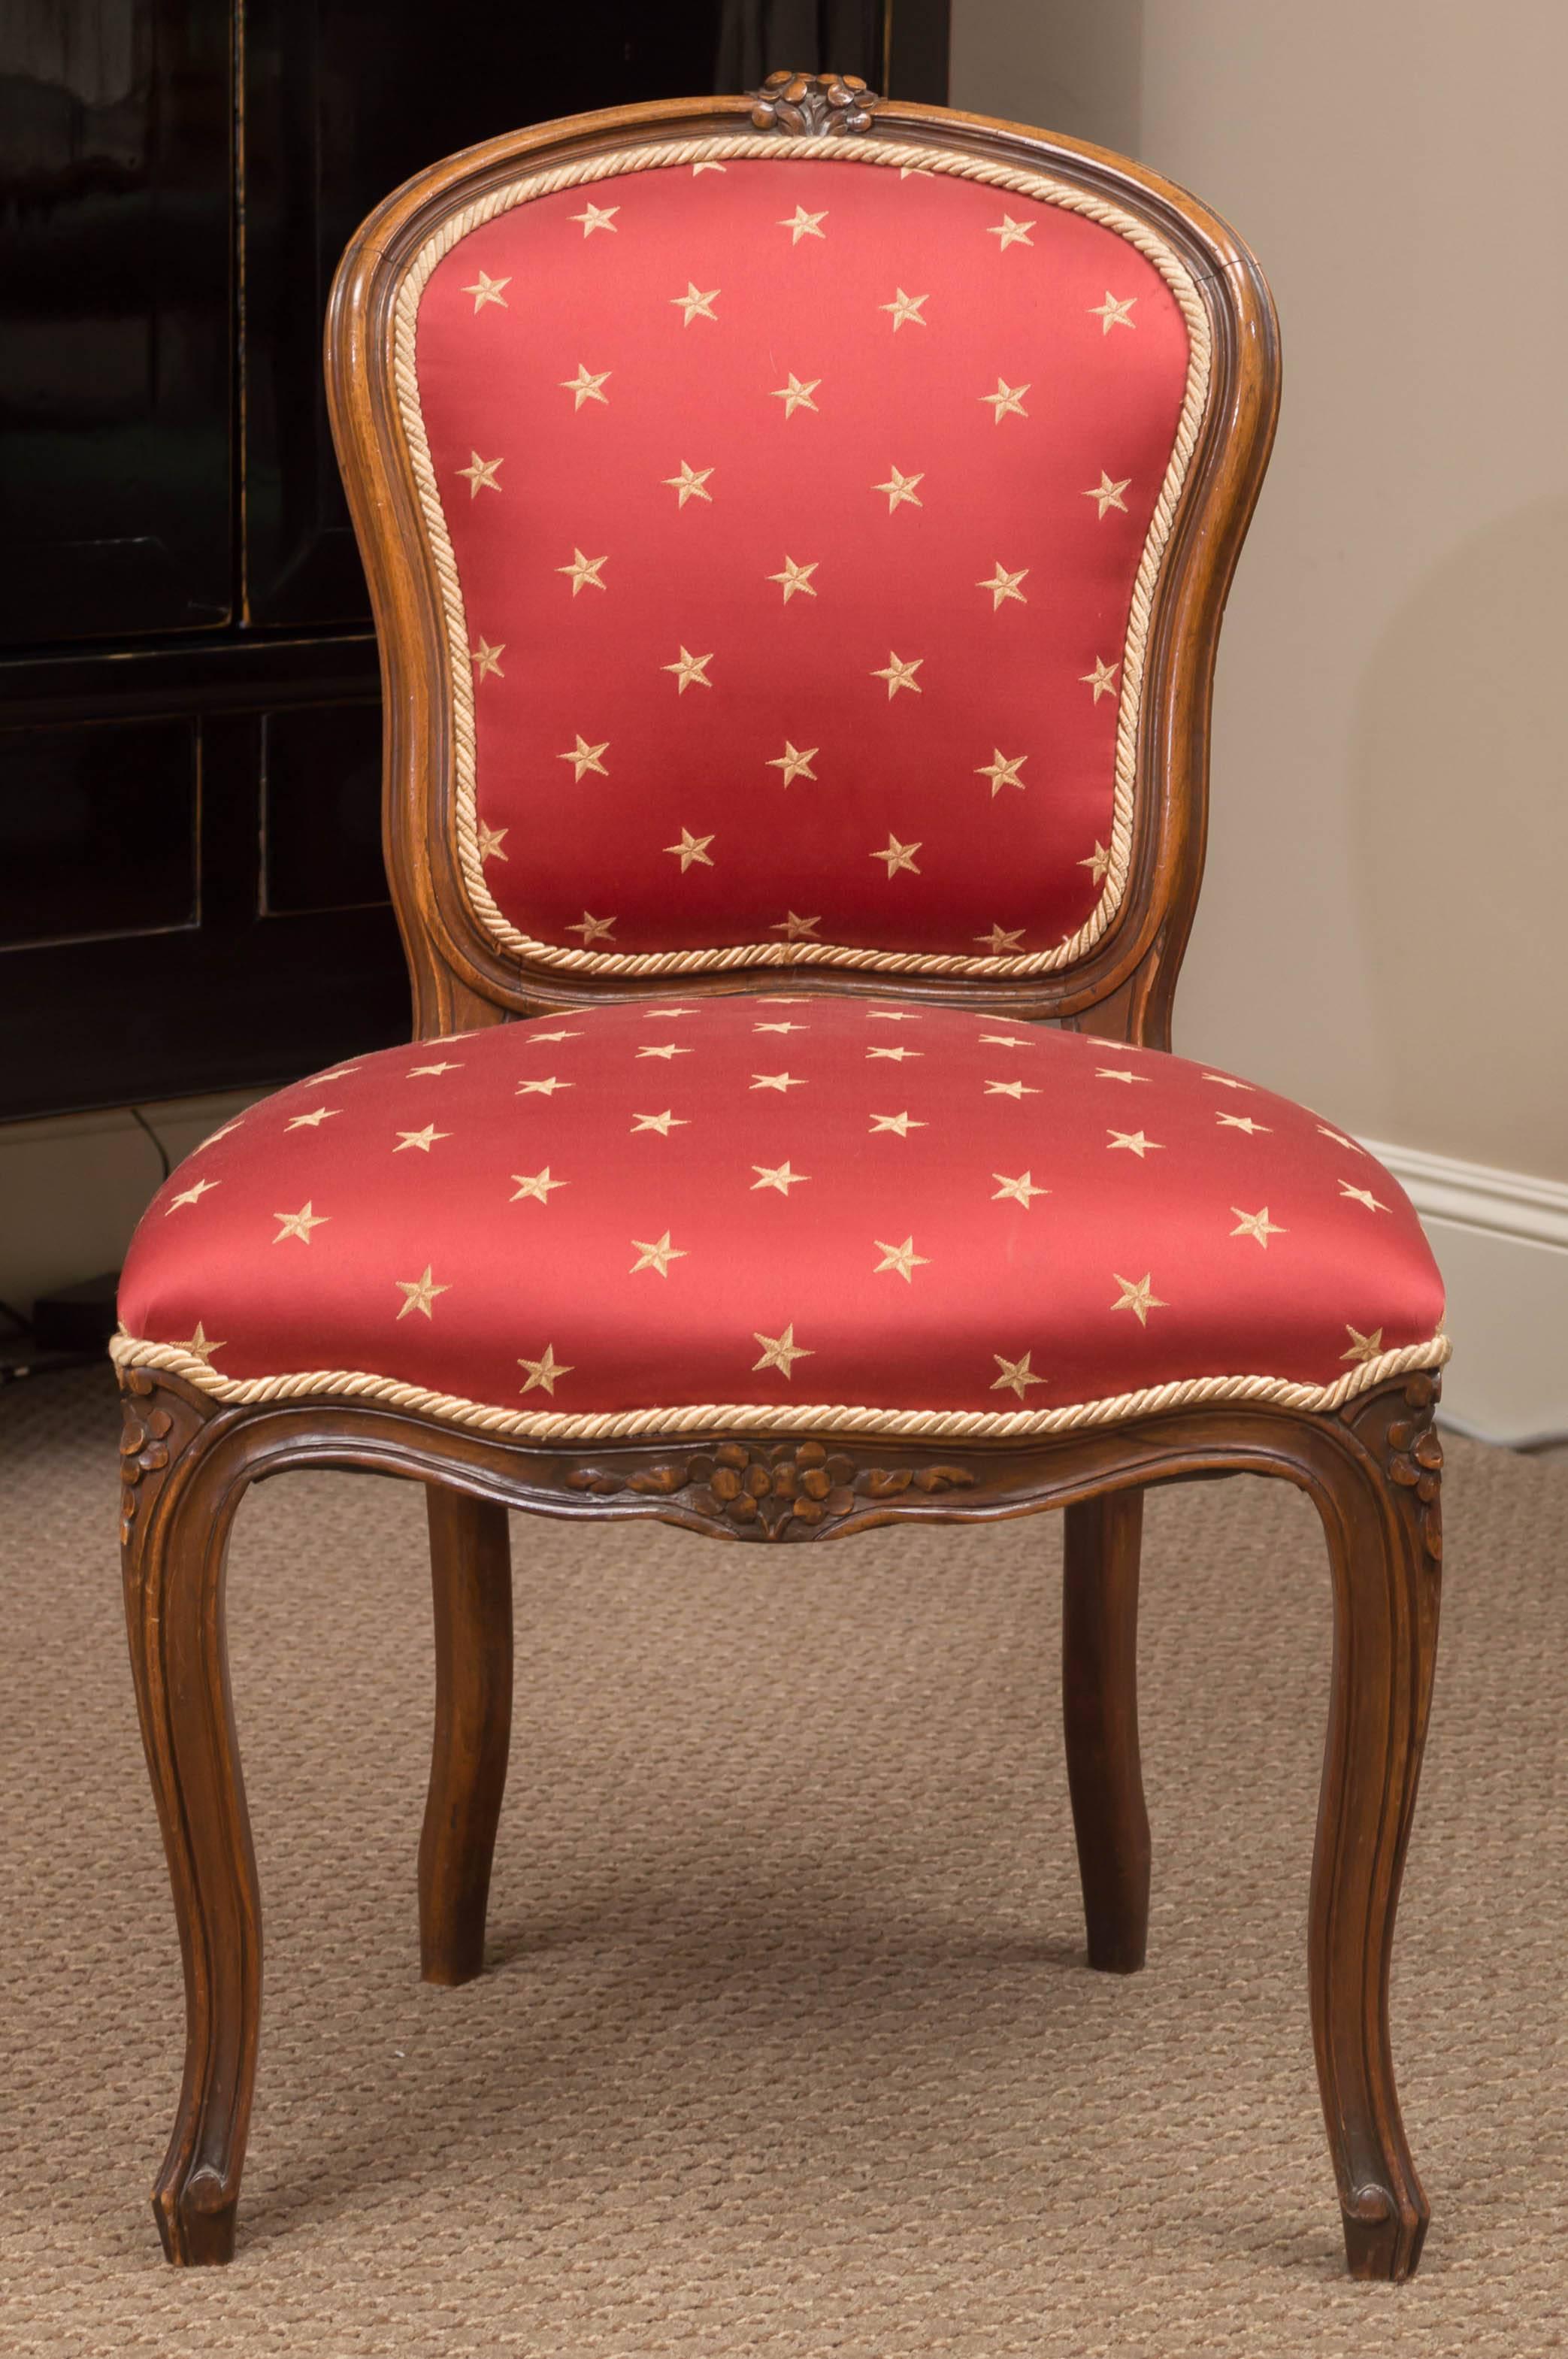 The carved and padded backrest over a shaped seat above a floral carved seat rail raised on cabriole legs. Covered in red silky fabric with gold stars and small gold roping trim.